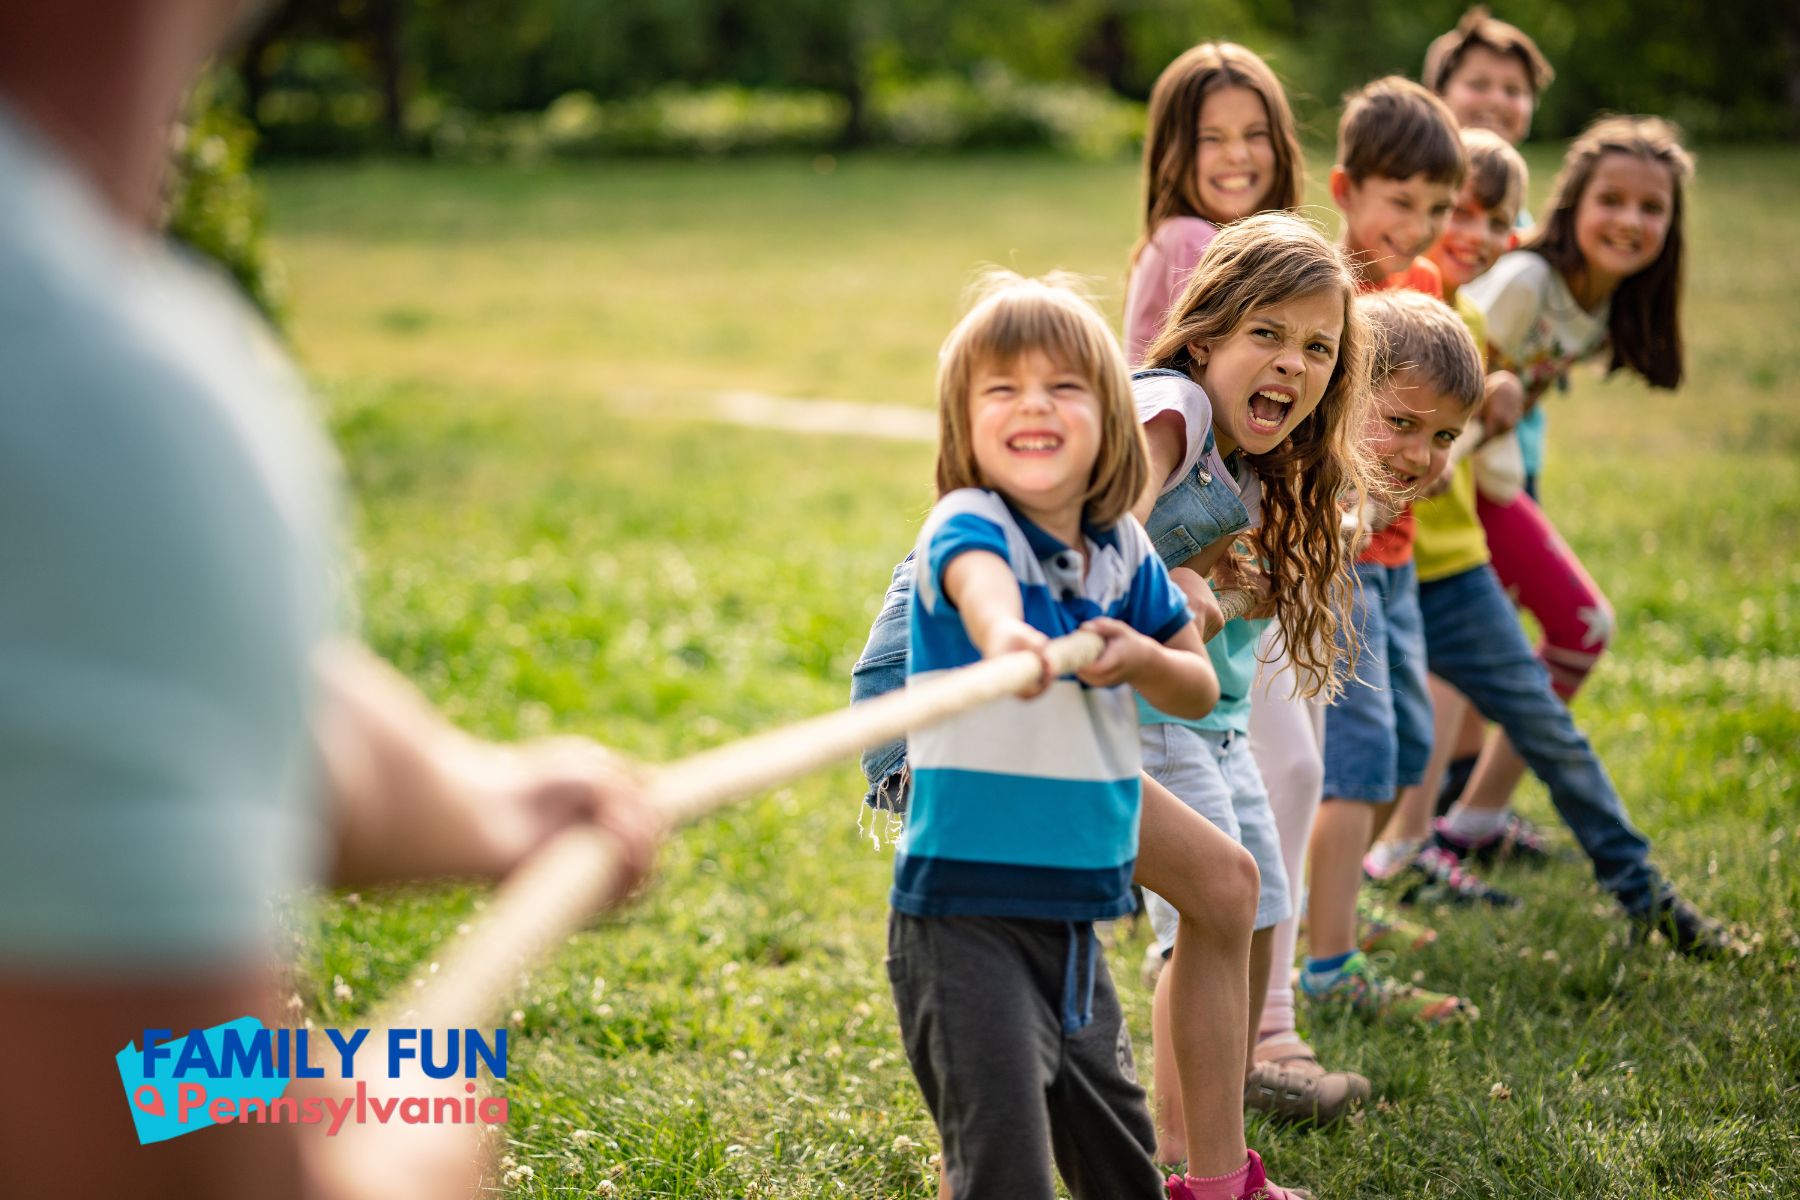 tug of war best party activities for kids